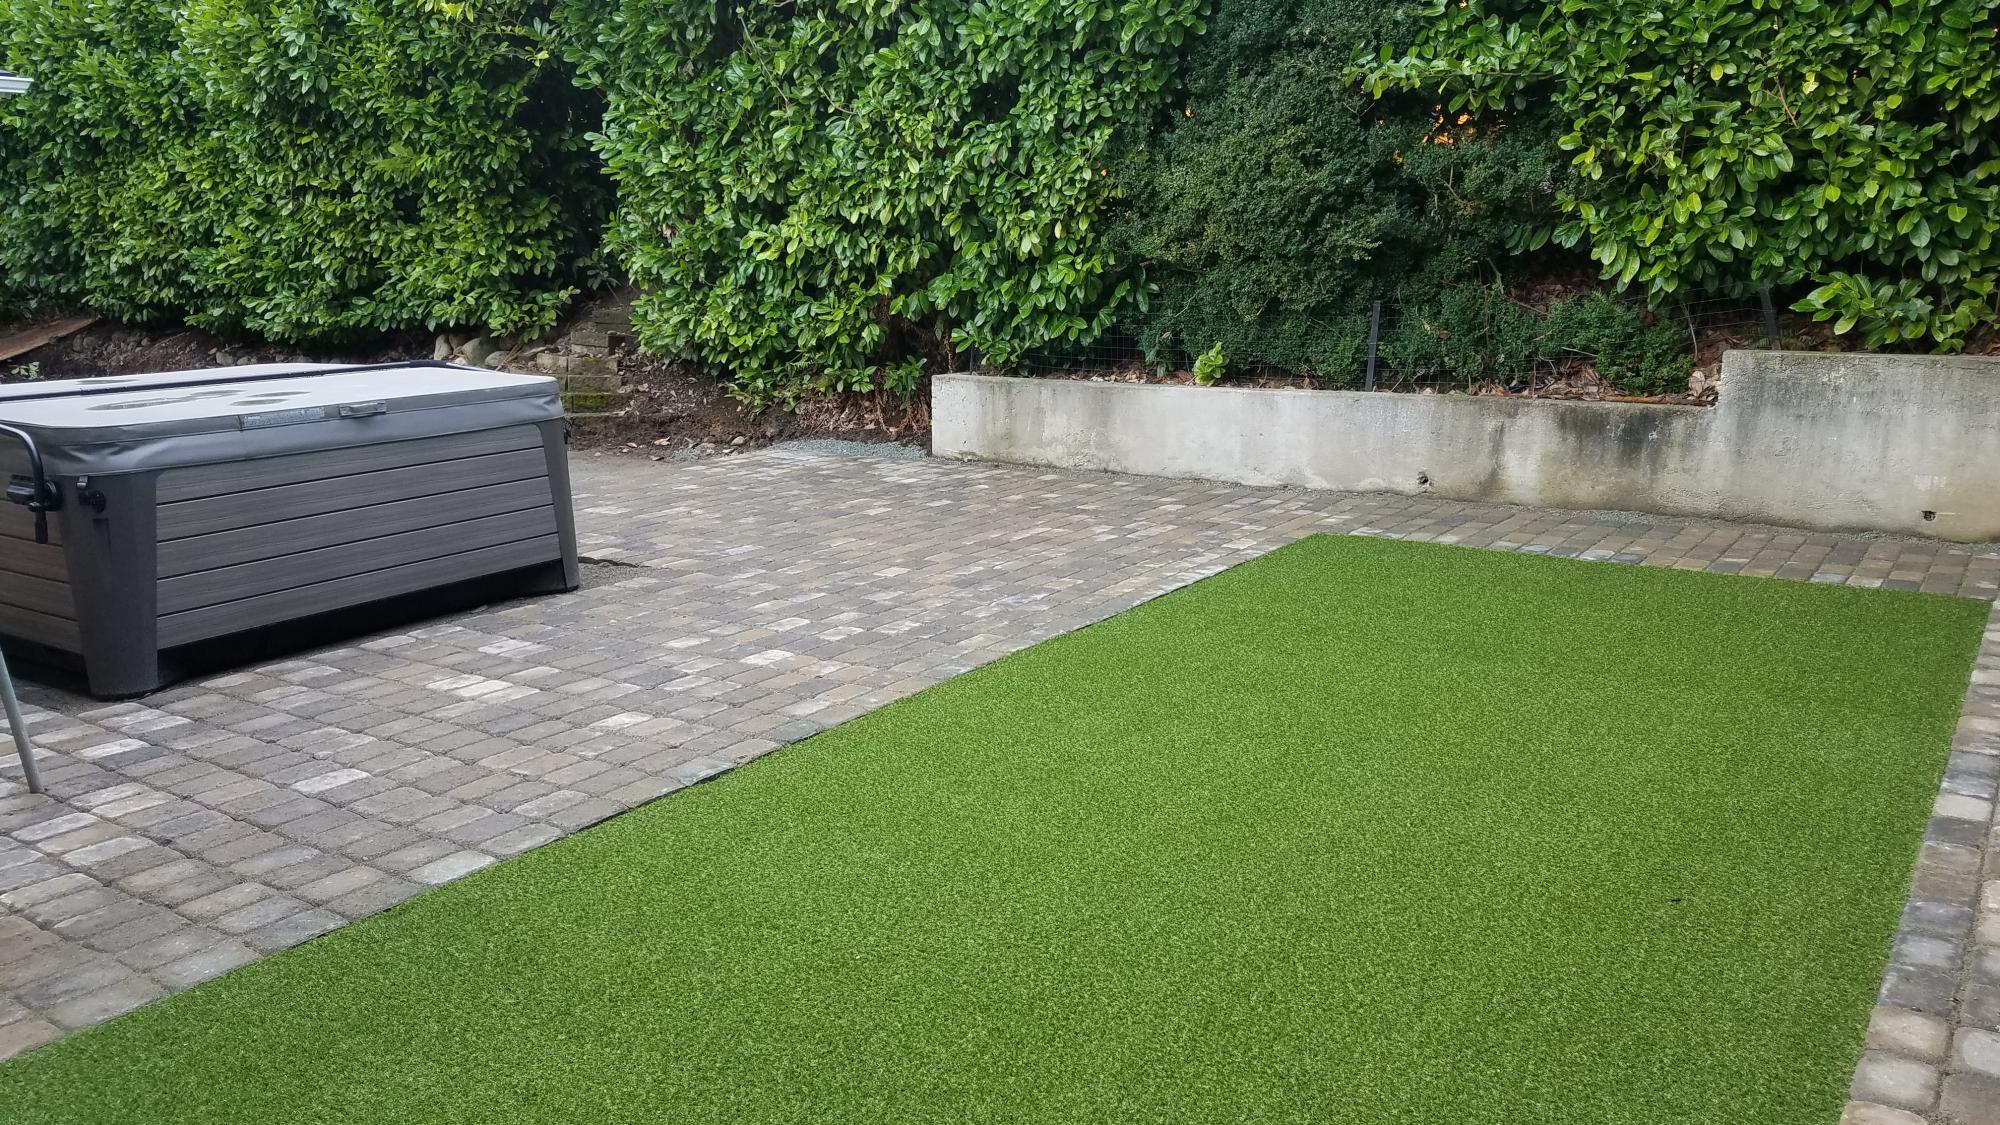 What are the pricing & rates for the Artificial Grass services